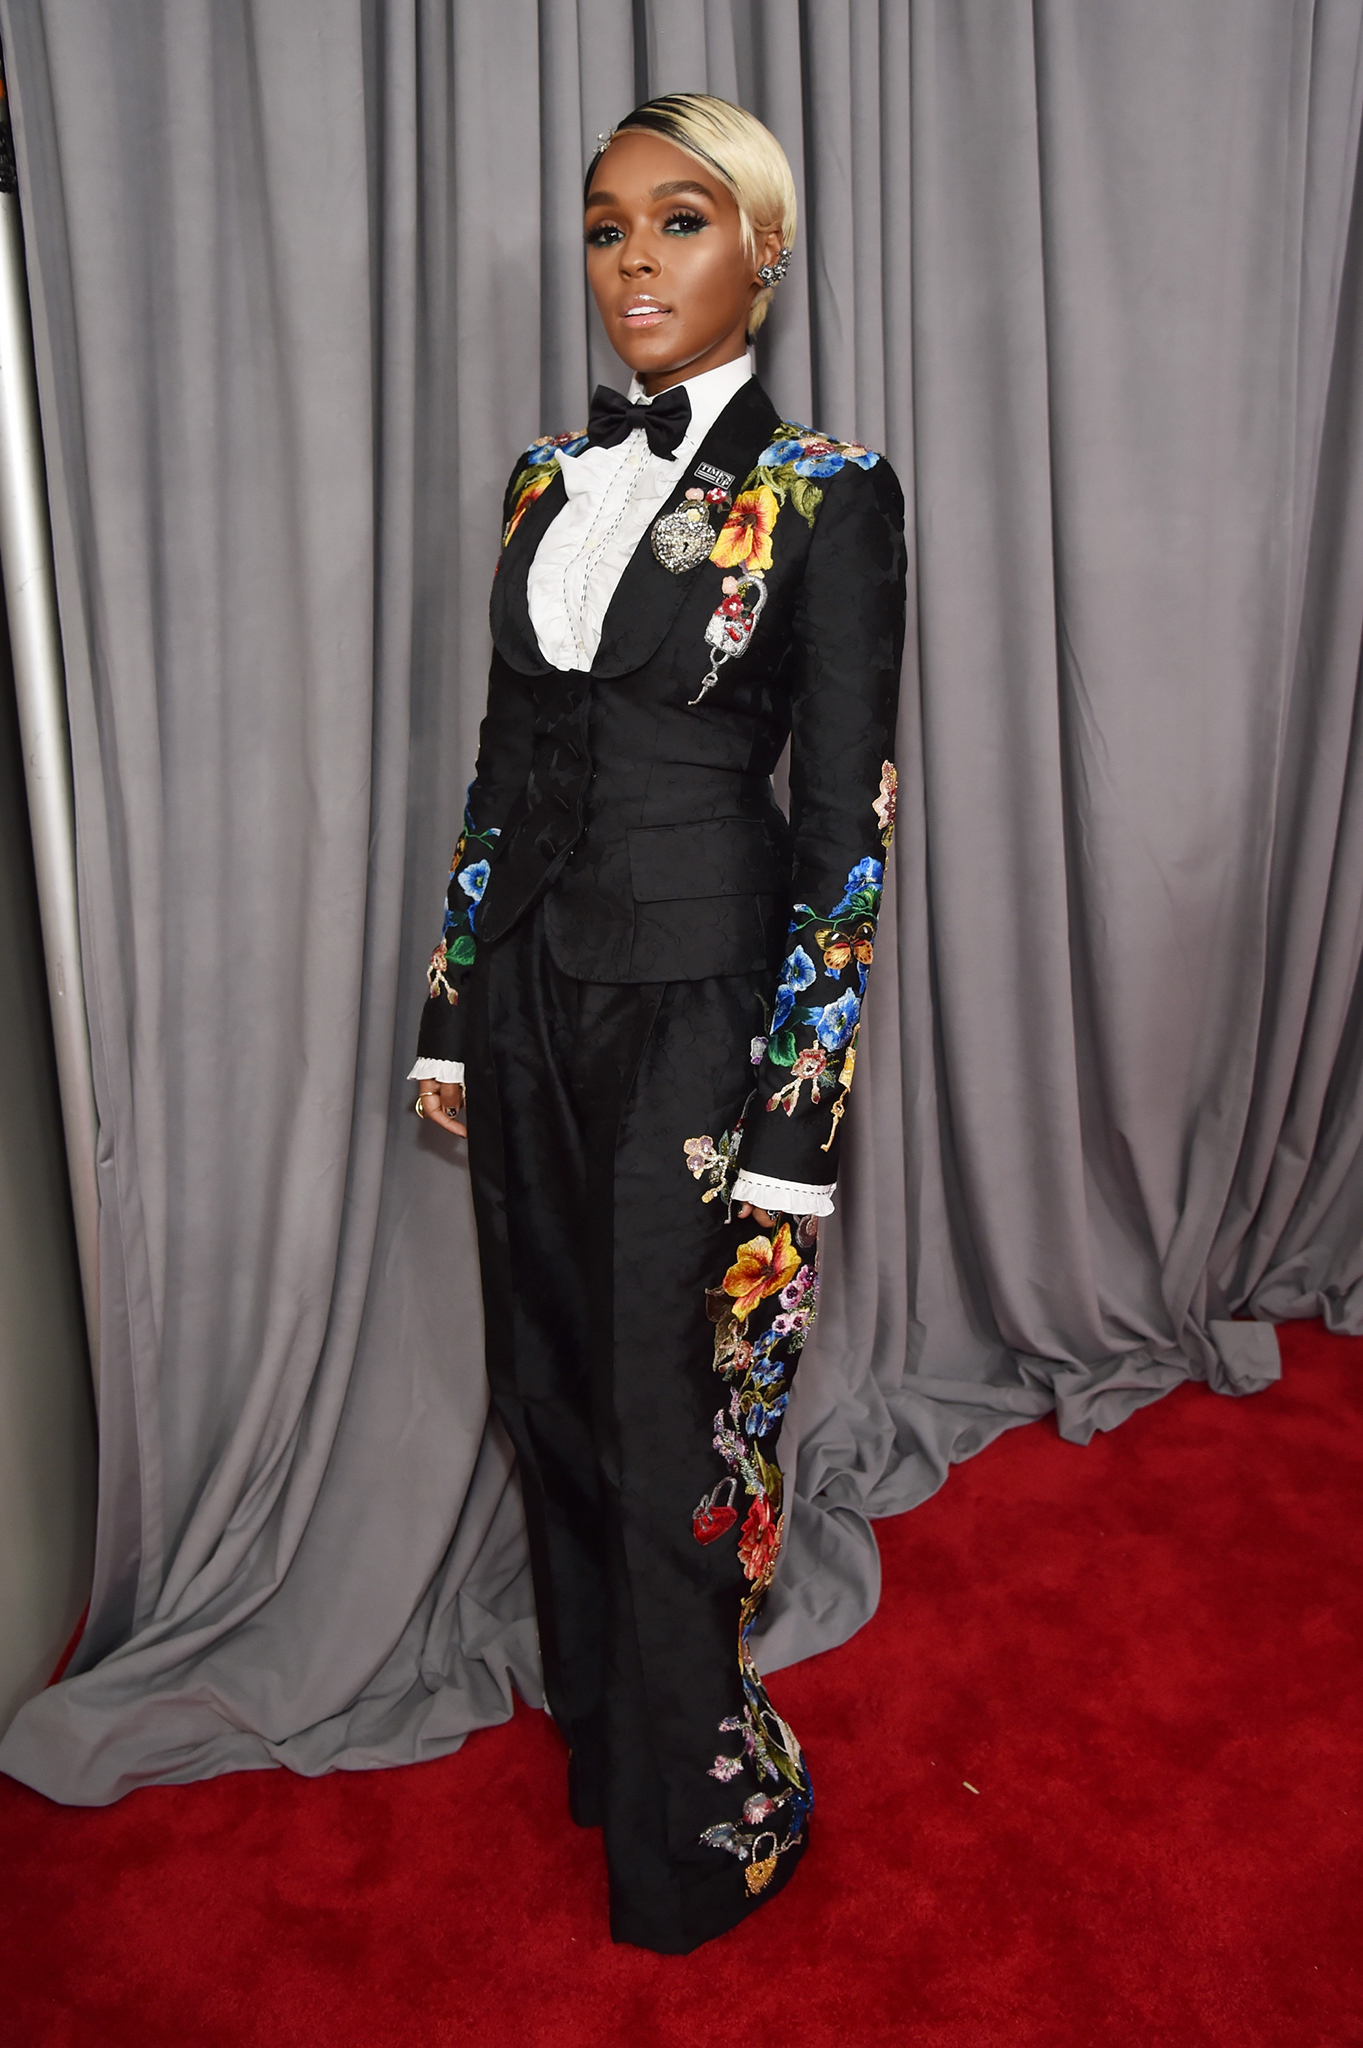 Recording artist and actor Janelle Monae attends the 60th Annual GRAMMY Awards at Madison Square Garden on Jan. 28, 2018 in New York City.